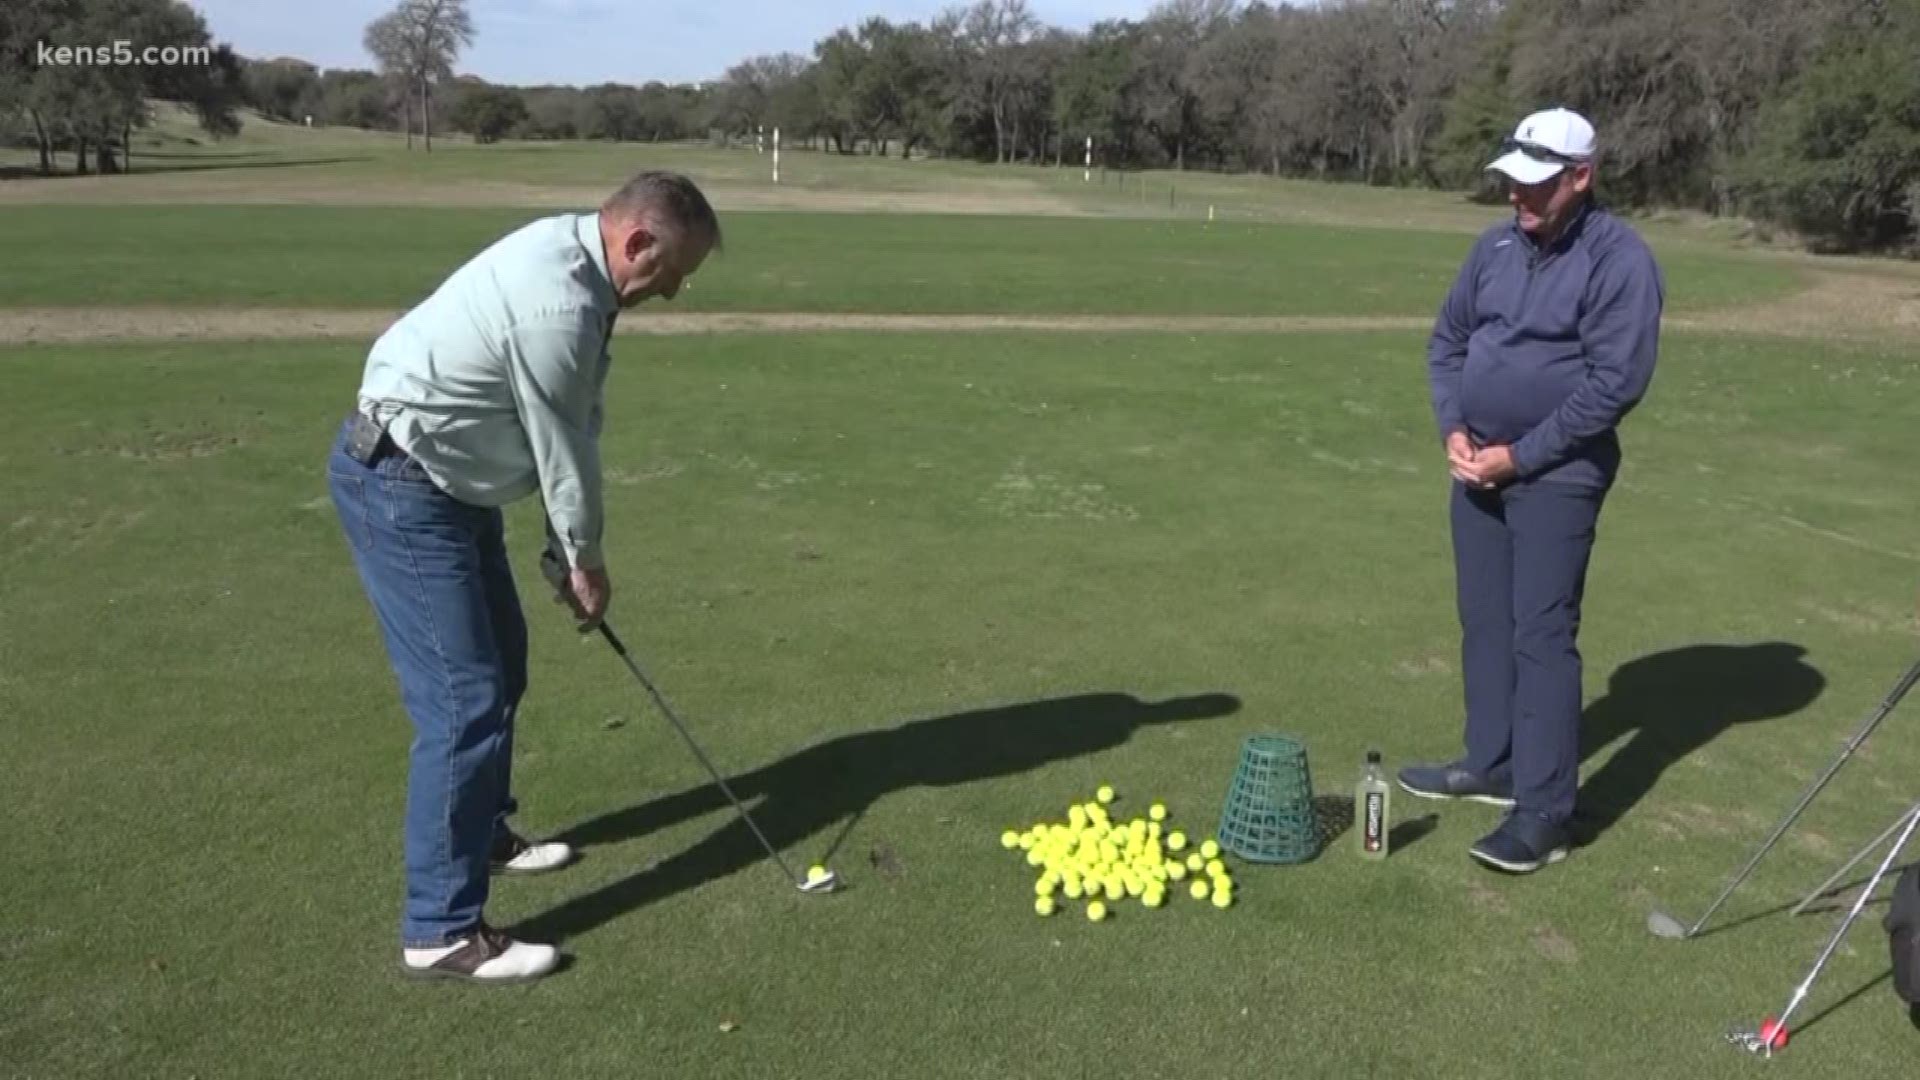 Barry Davis takes on golfing this week in Texas Outdoors!